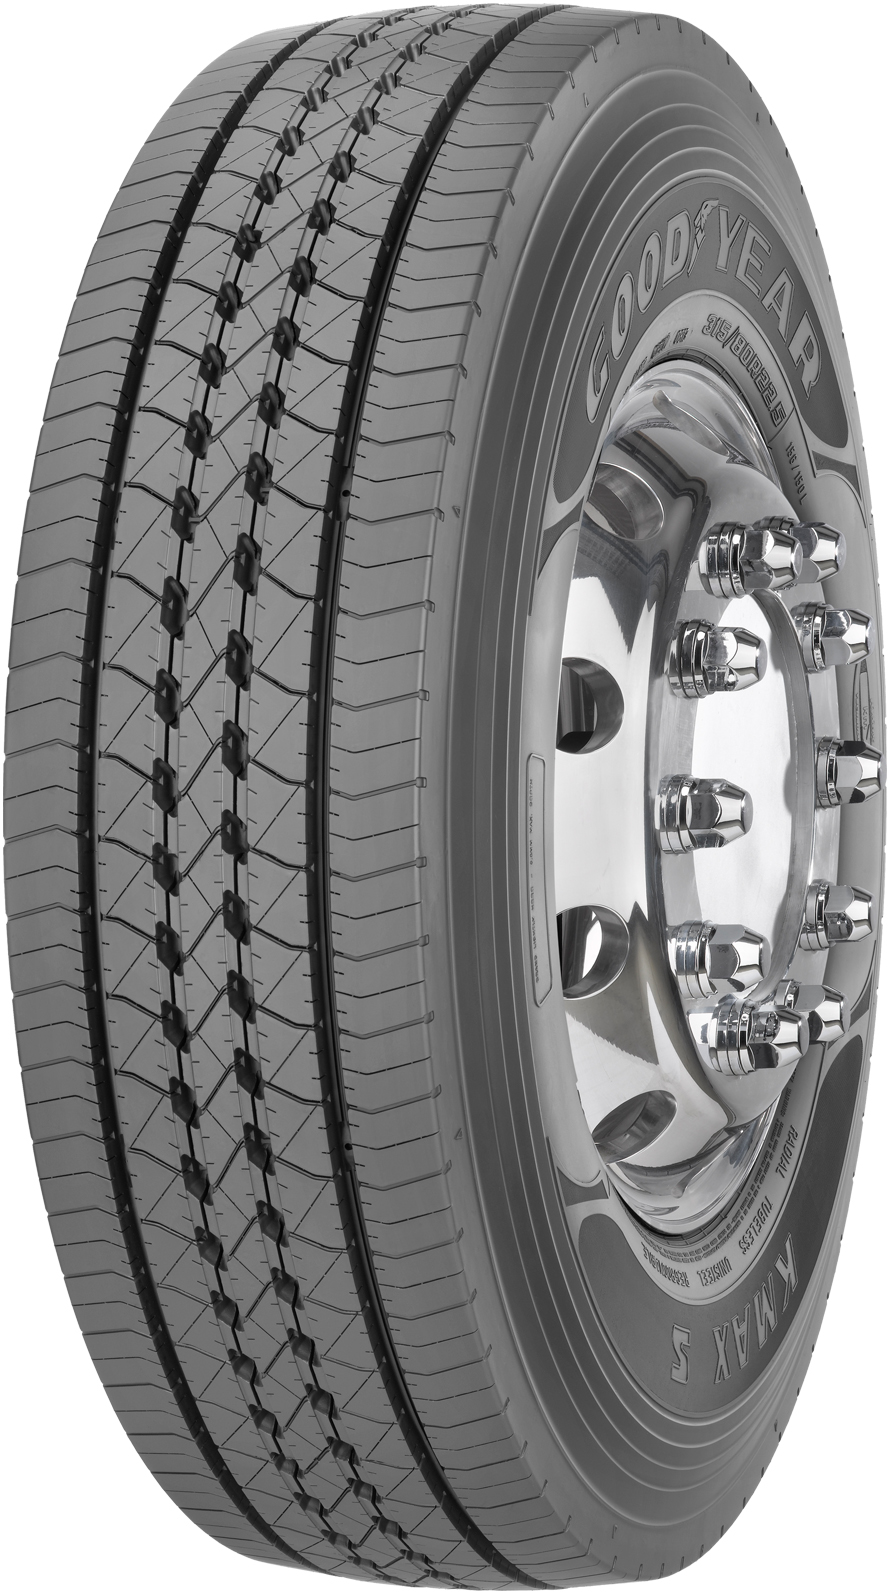 product_type-heavy_tires GOODYEAR KMAX S 14 TL 235/75 R17.5 132M